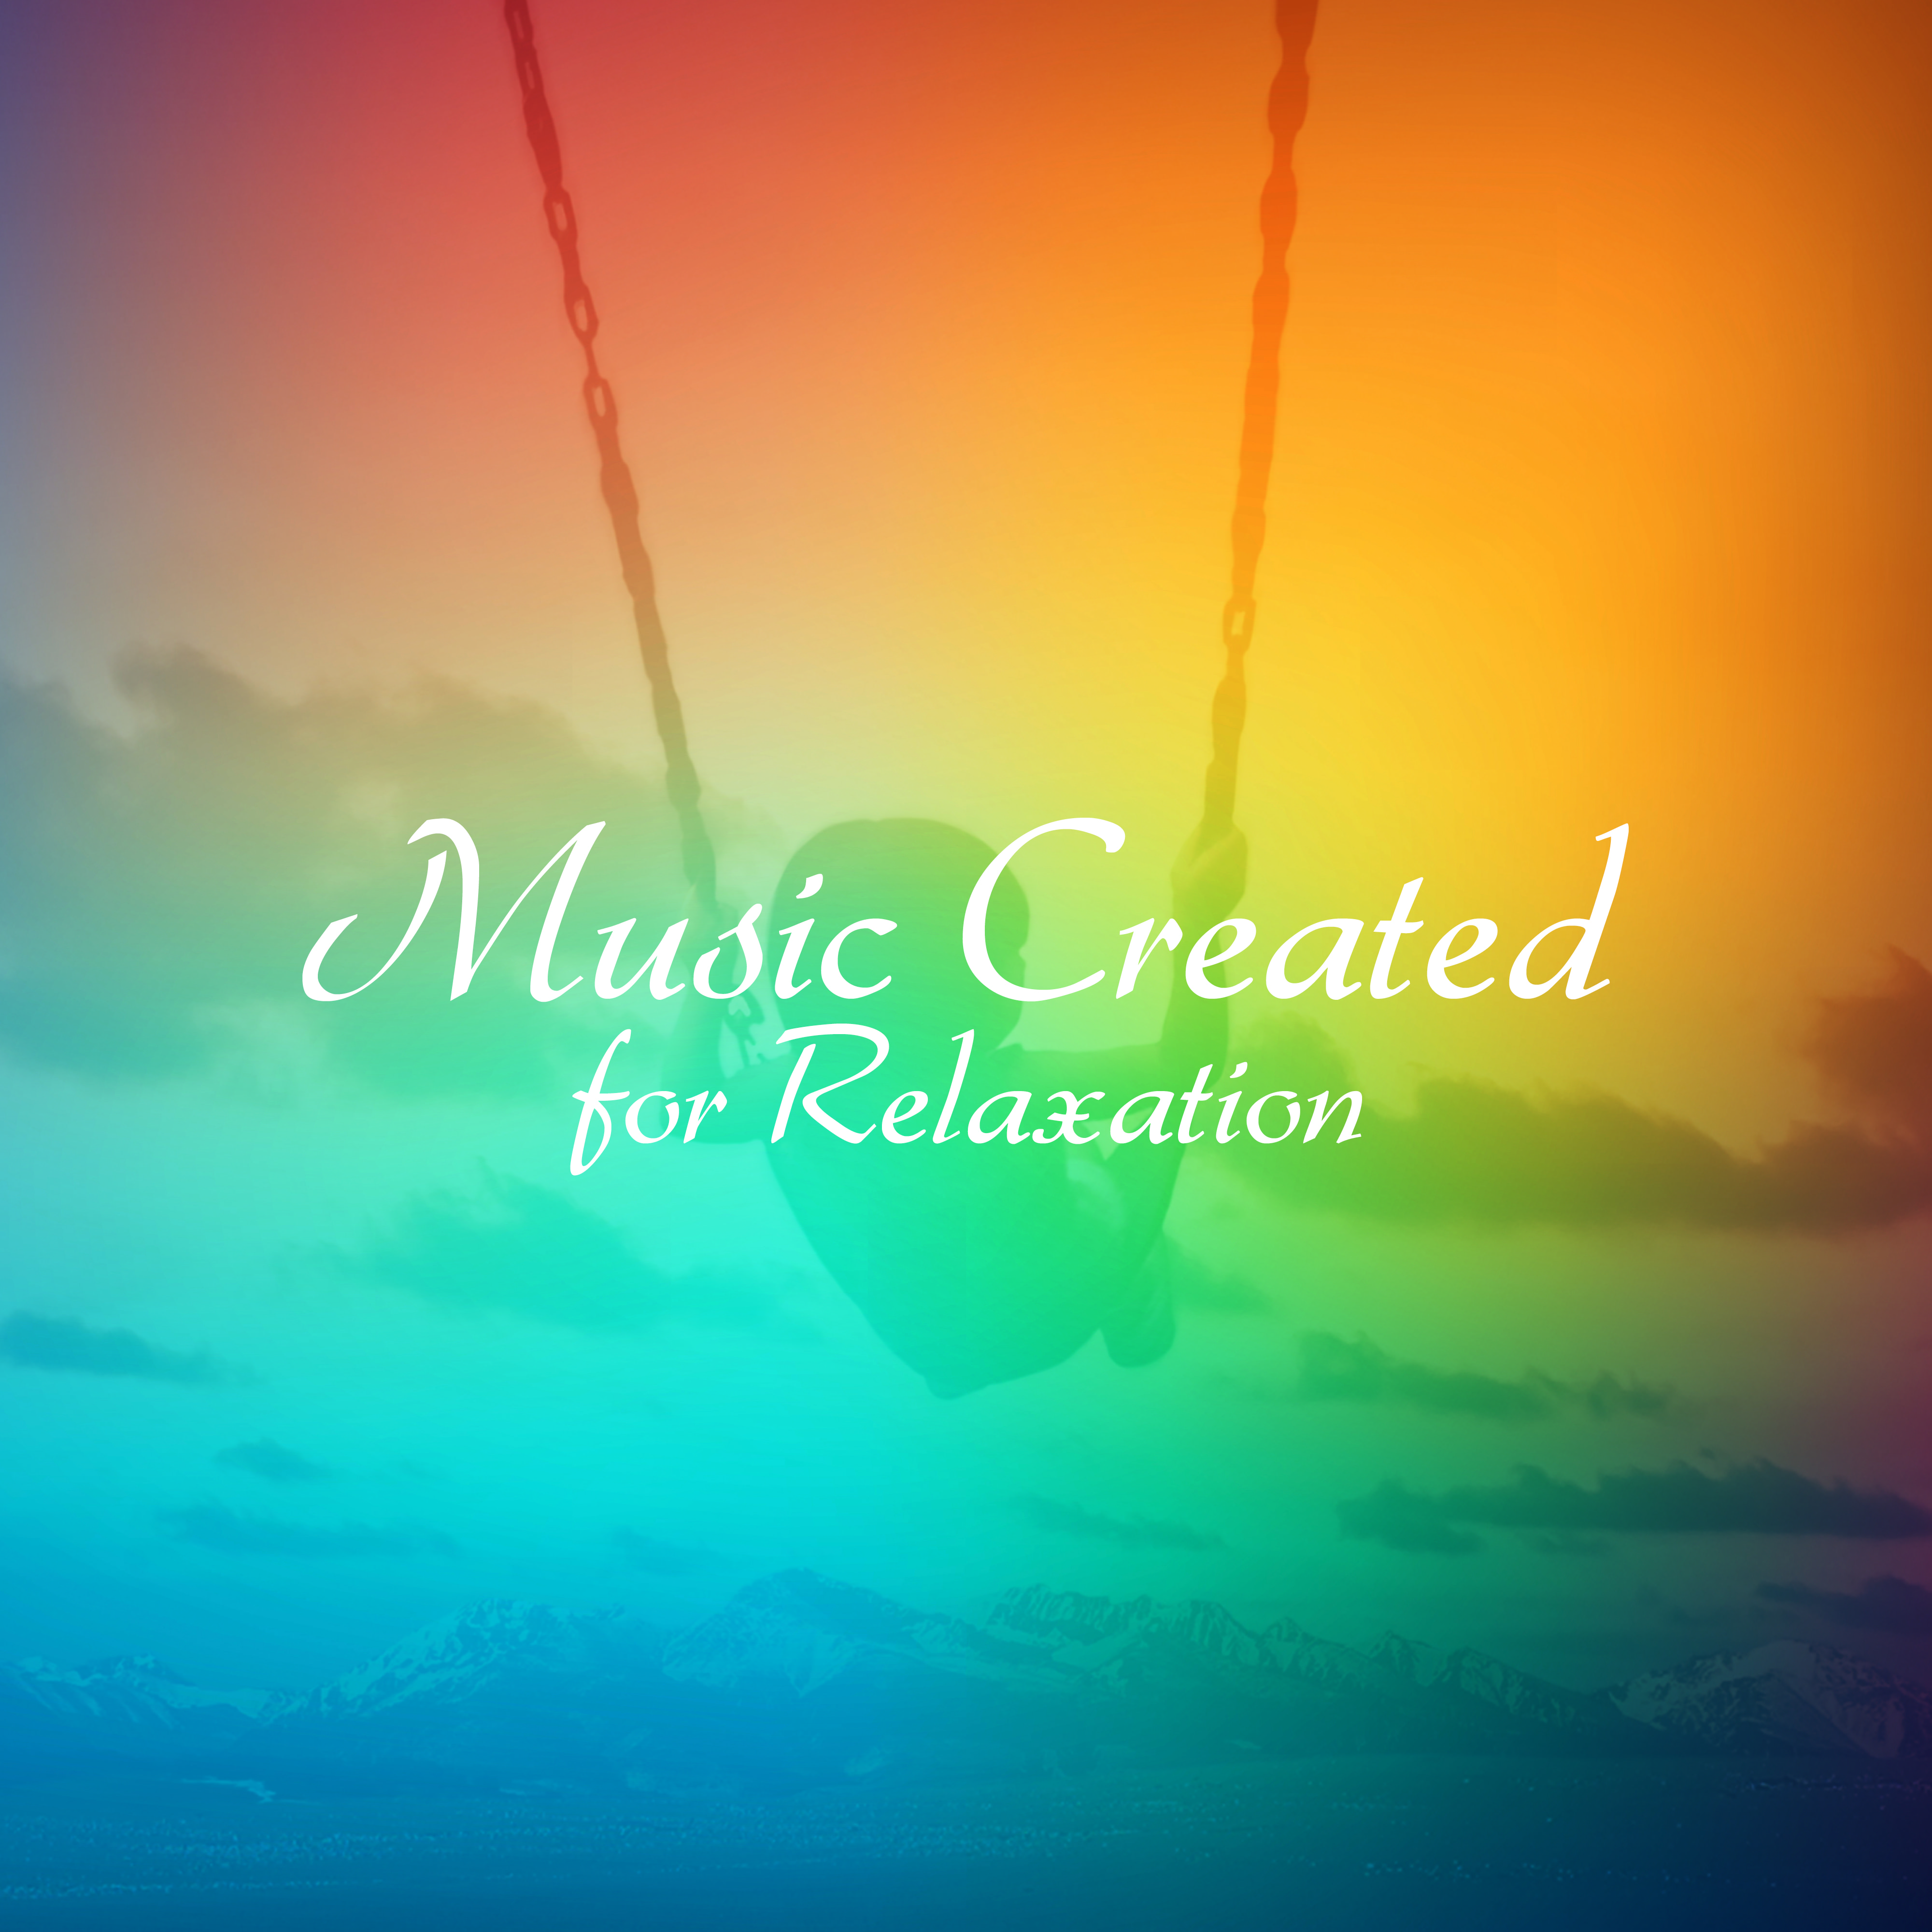 Music Created for Relaxation